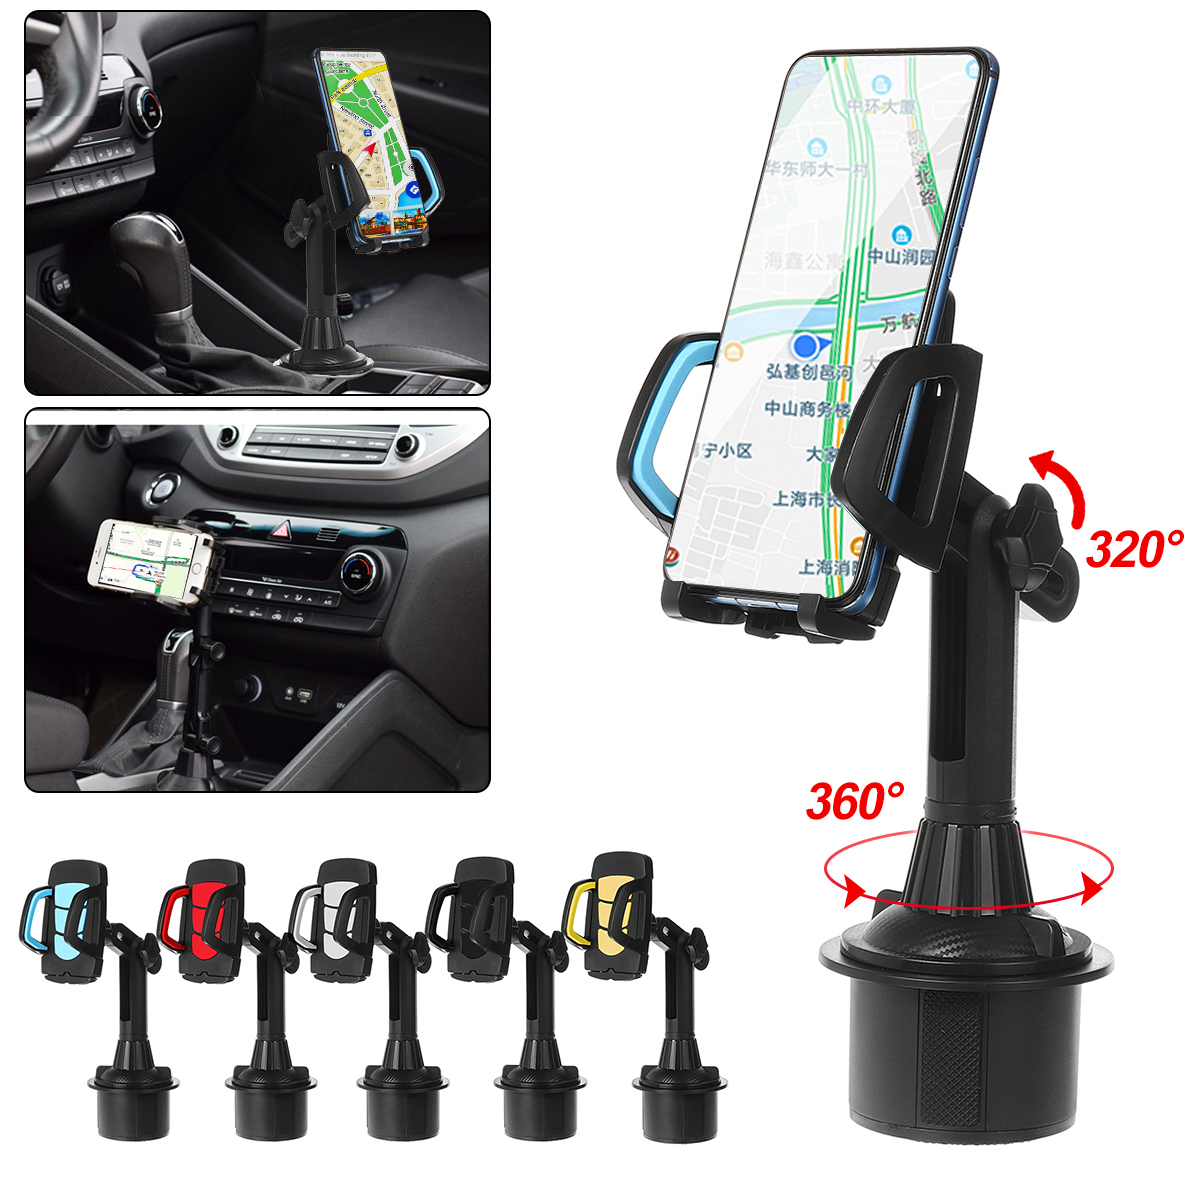 Bakeey-Car-Mount-360deg-Adjustable-Cup-Holder-Cradle-for-iPhone-12-for-Samsung-Galaxy-Note-20-ultra--1778684-2